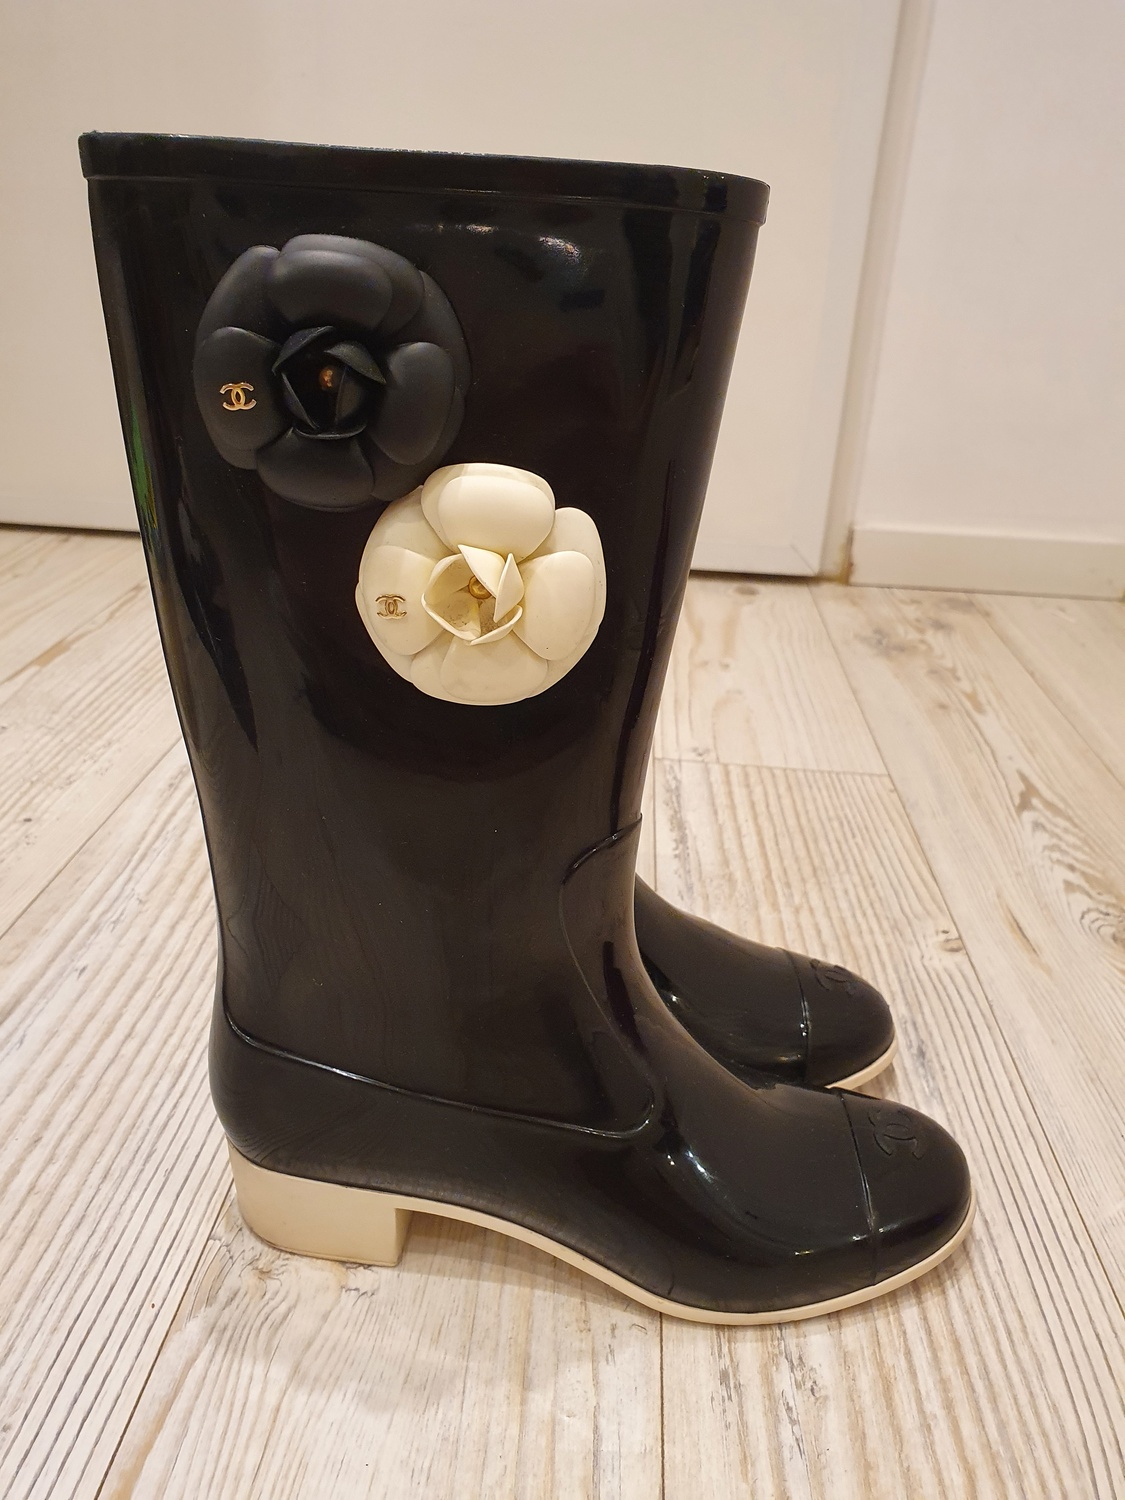 Rain boots Chanel - 40, buy pre-owned at 390 EUR